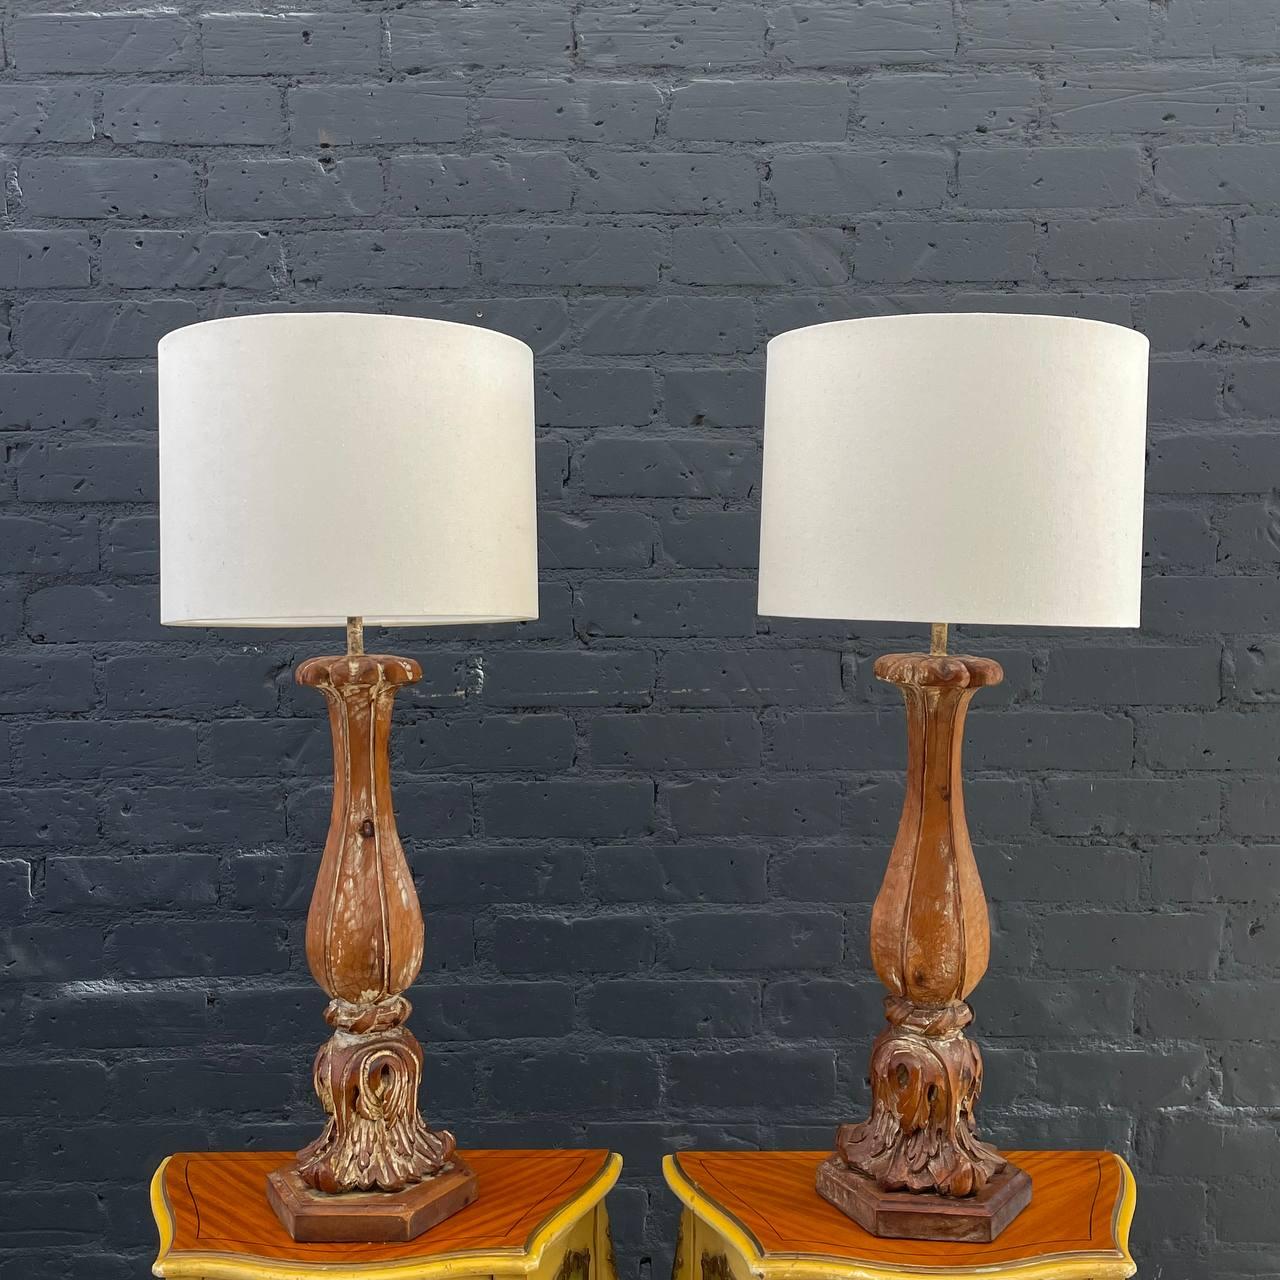 Pair of Antique Carved Italian Table Lamps with a Distressed Paint Finish 

Country: Italy
Materials: Distressed Wood
Style: Italian Antique 
Year: 1940s

$2,495 pair 

Dimensions:
35.50”H x 8”W x 8”D
Shades:
10”H x 15”W x 15”D.